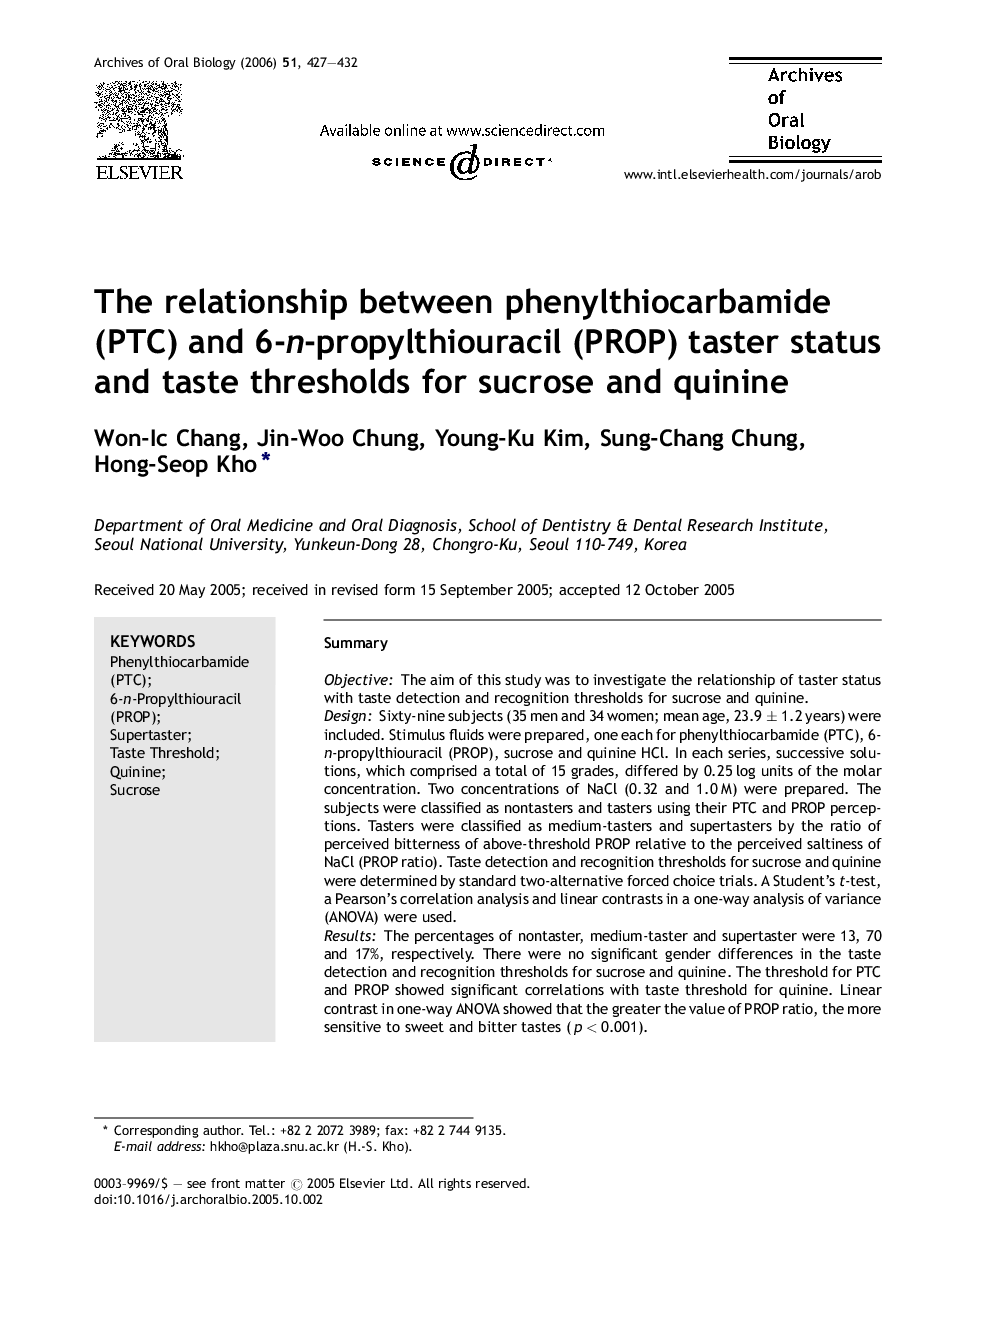 The relationship between phenylthiocarbamide (PTC) and 6-n-propylthiouracil (PROP) taster status and taste thresholds for sucrose and quinine